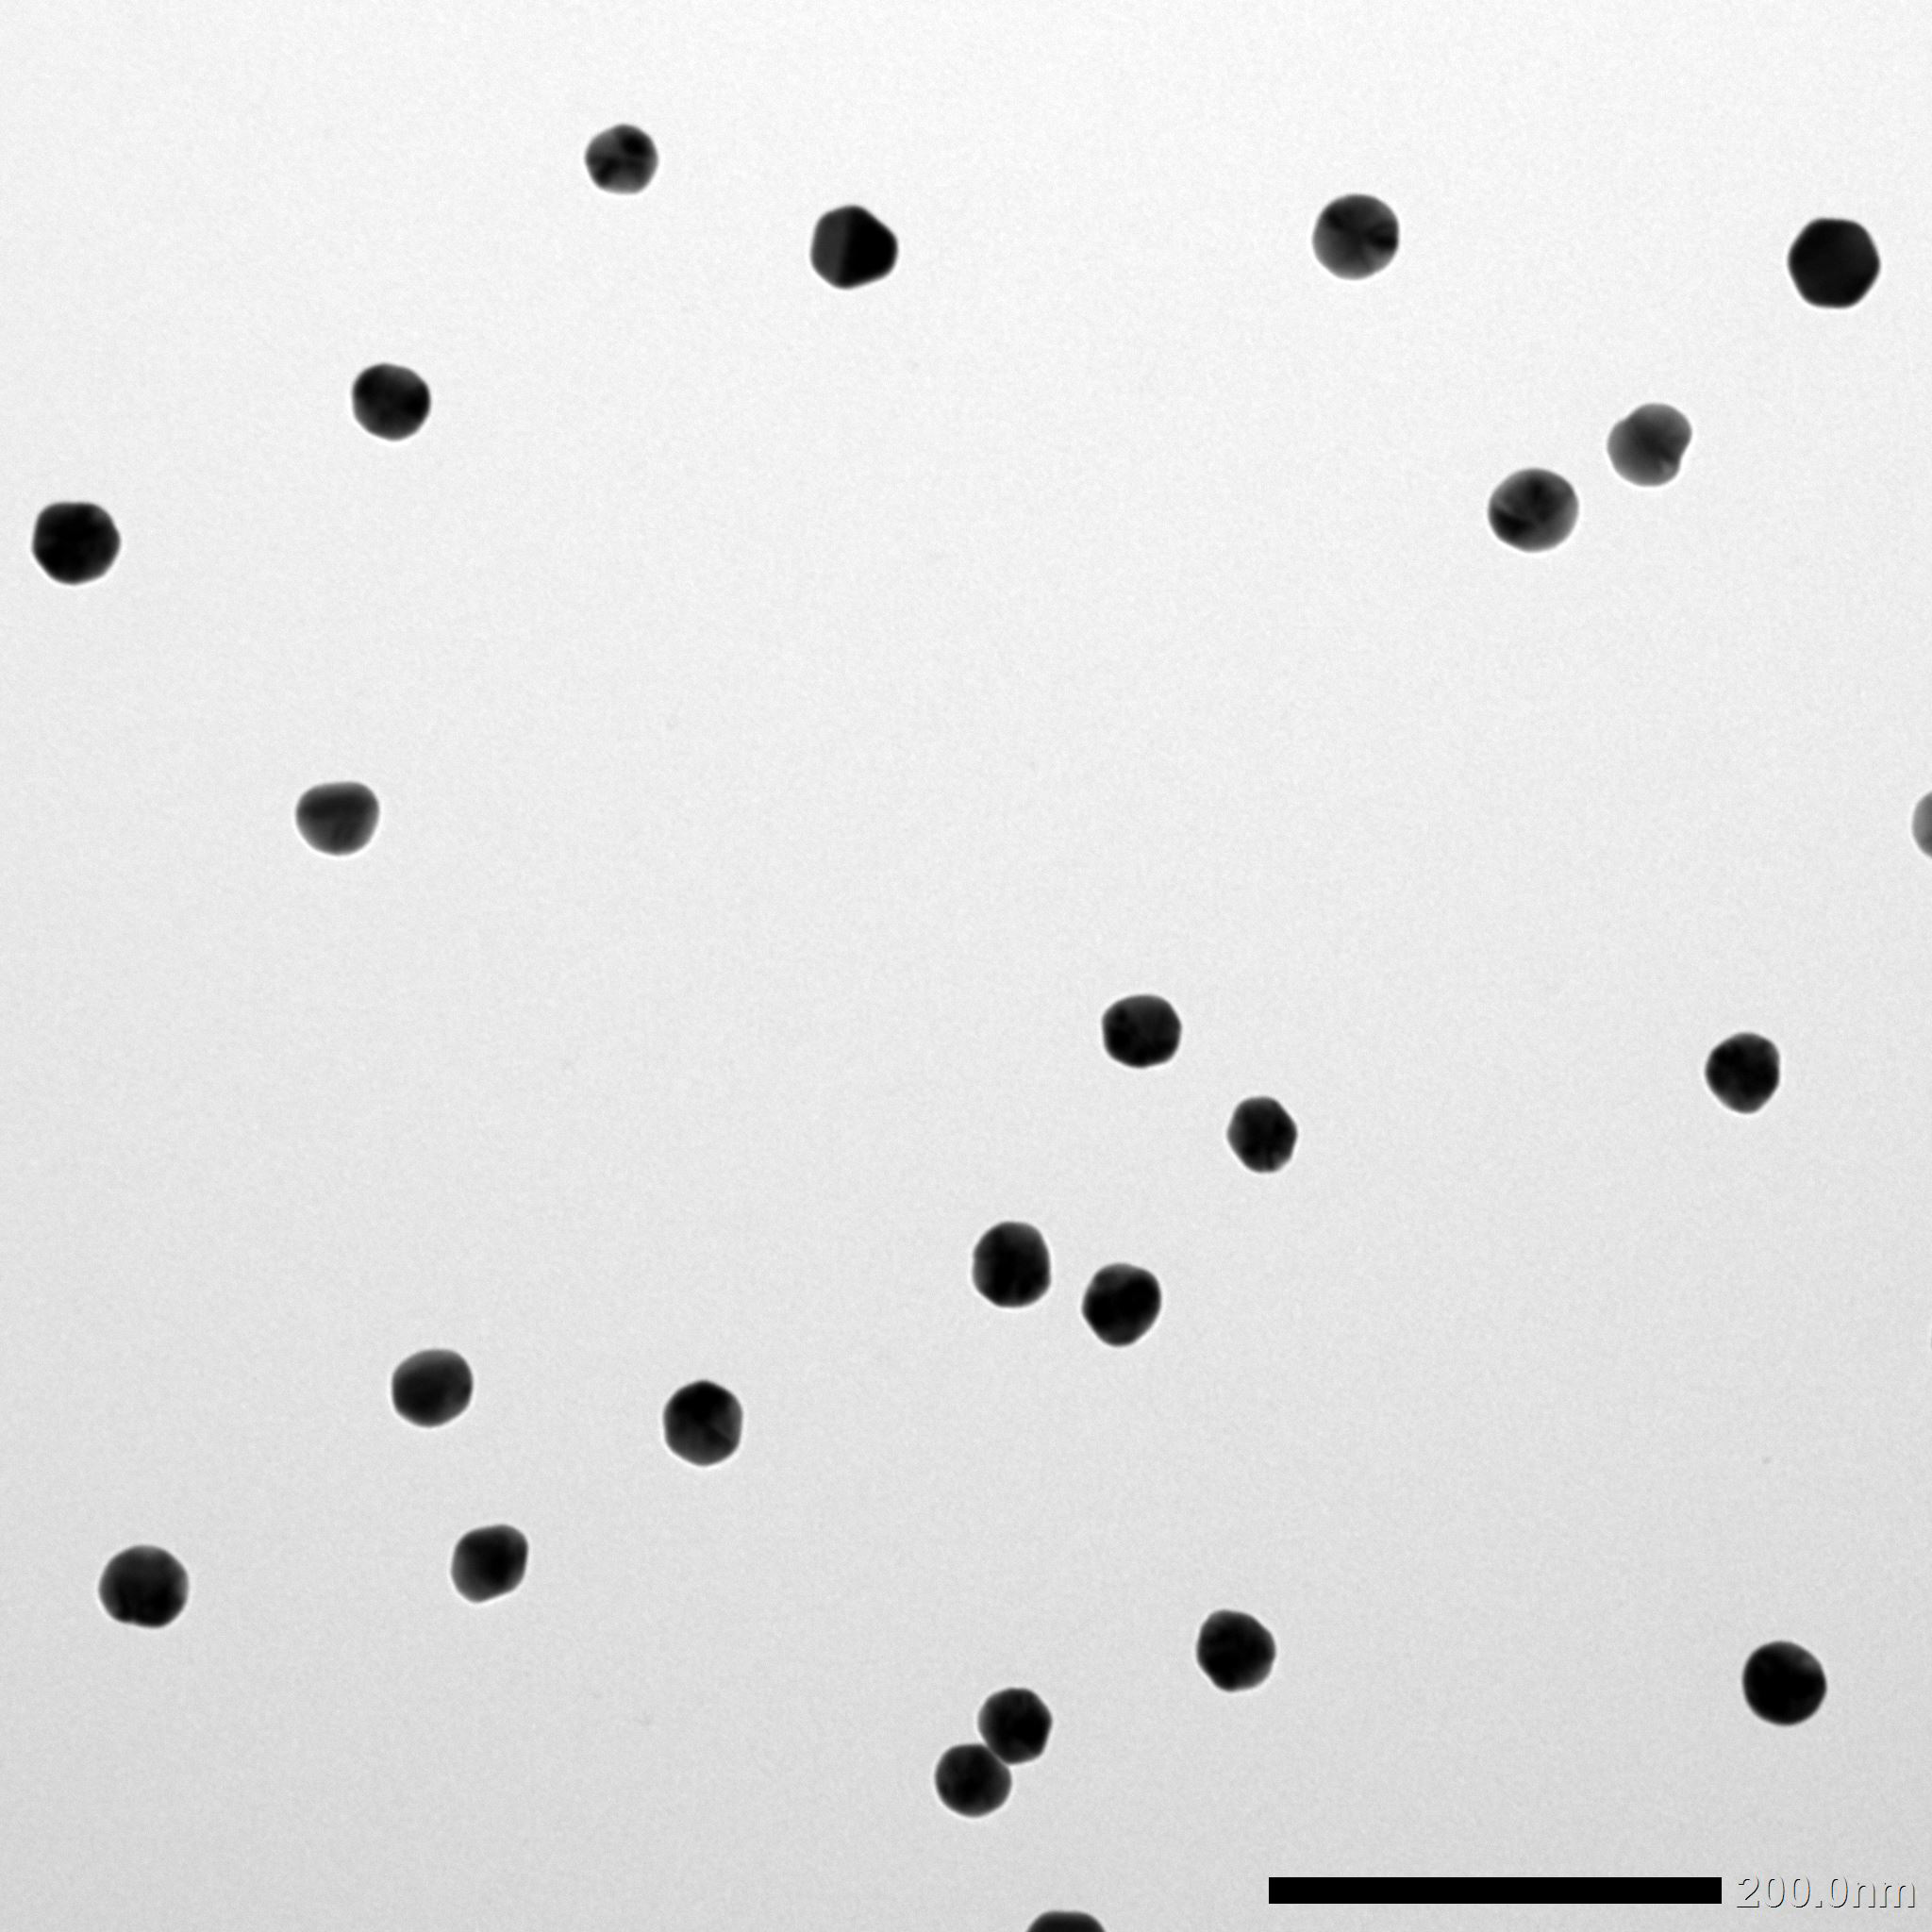 40nm Gold Nanoparticles
